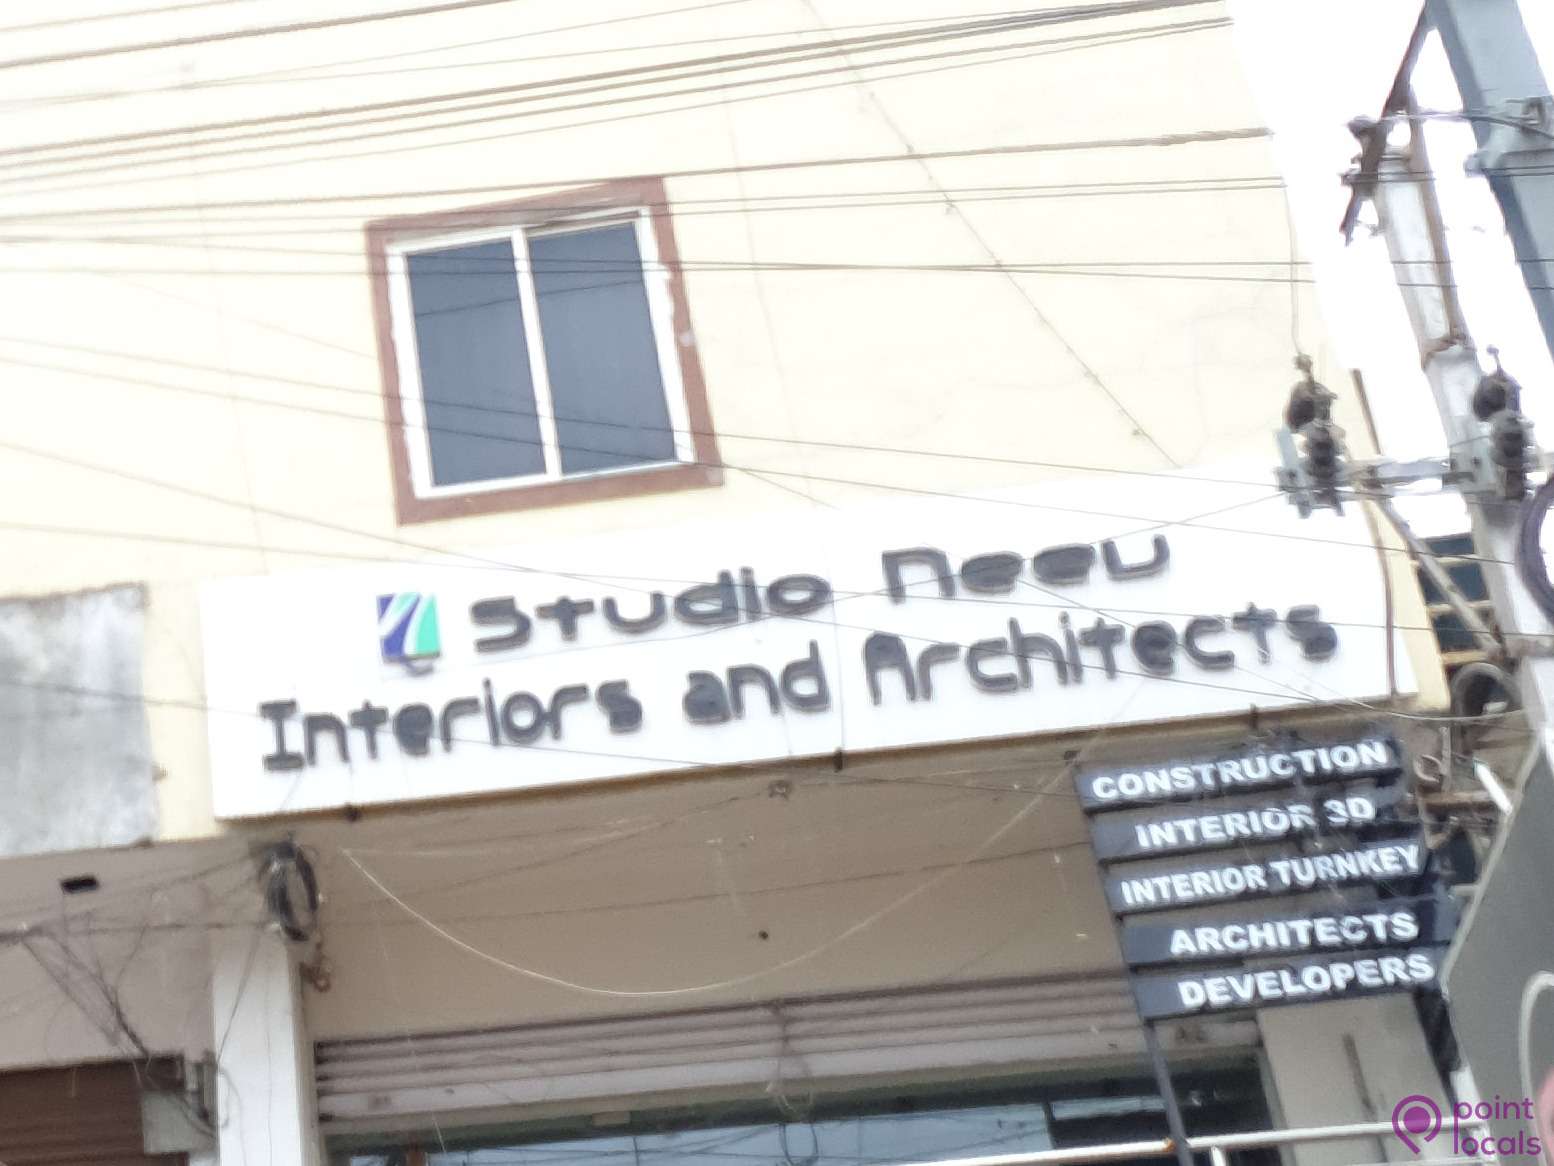 Studio Need Interiors And Architects - Architects and Civil Engineers in  Hyderabad,Telangana | Pointlocals